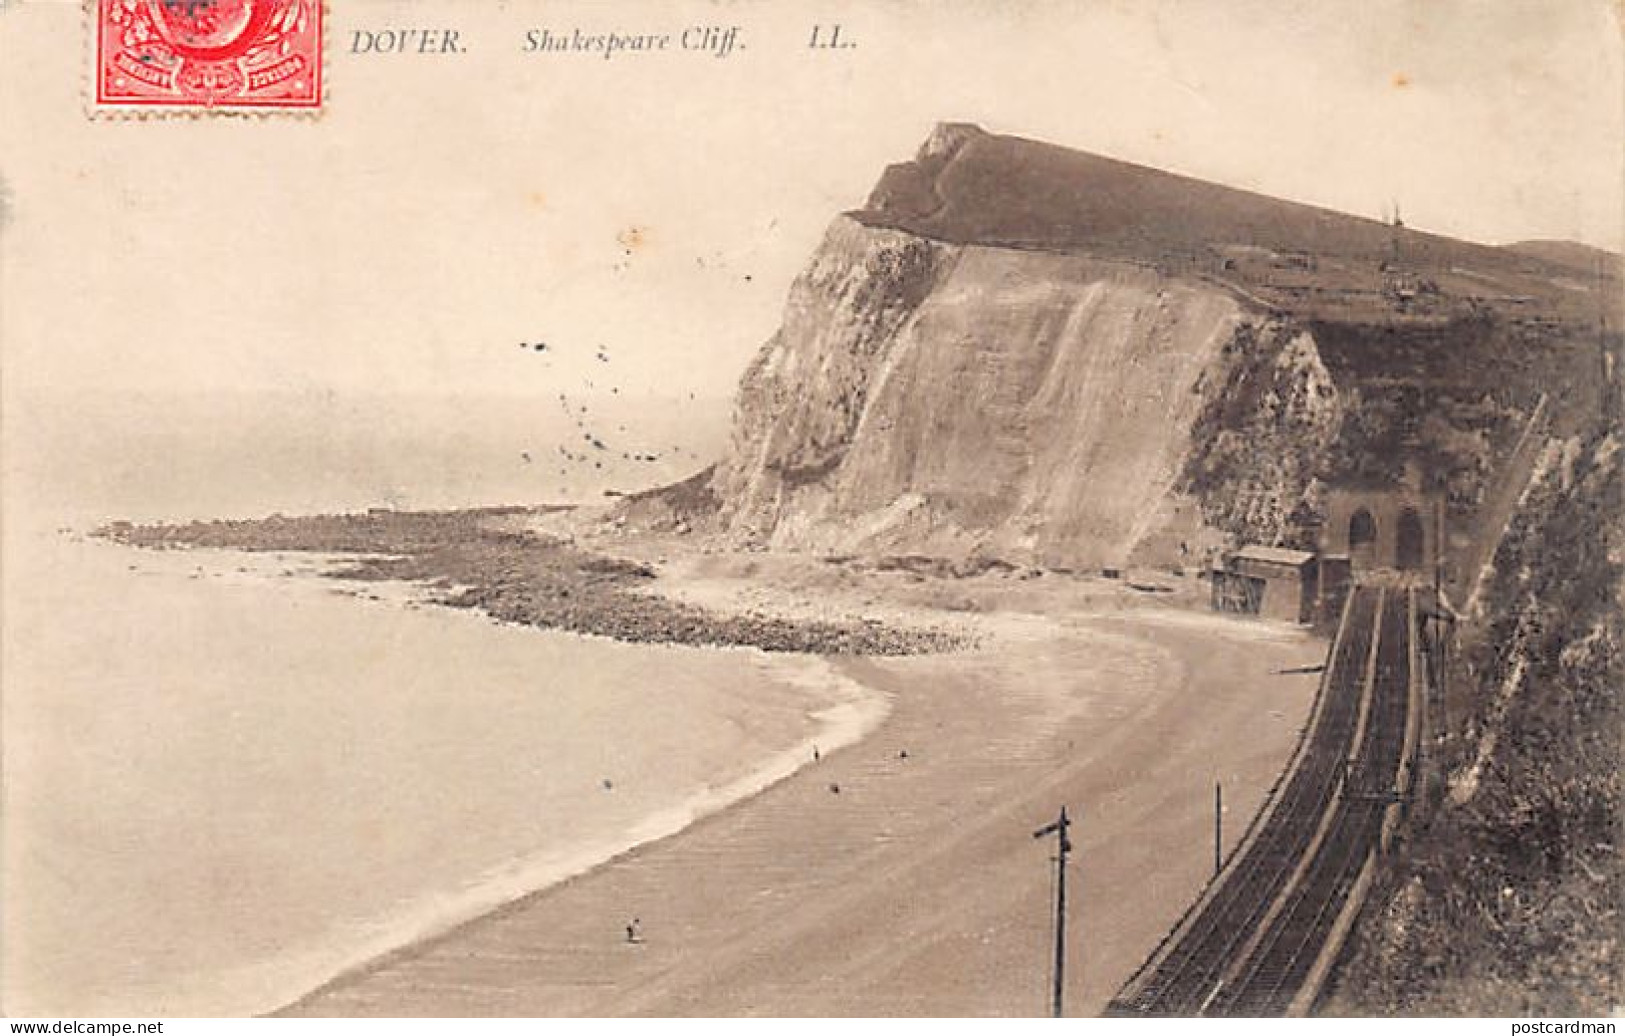 England - DOVER - Shakespeare Cliff - Publ. Levy L.L. - Dover